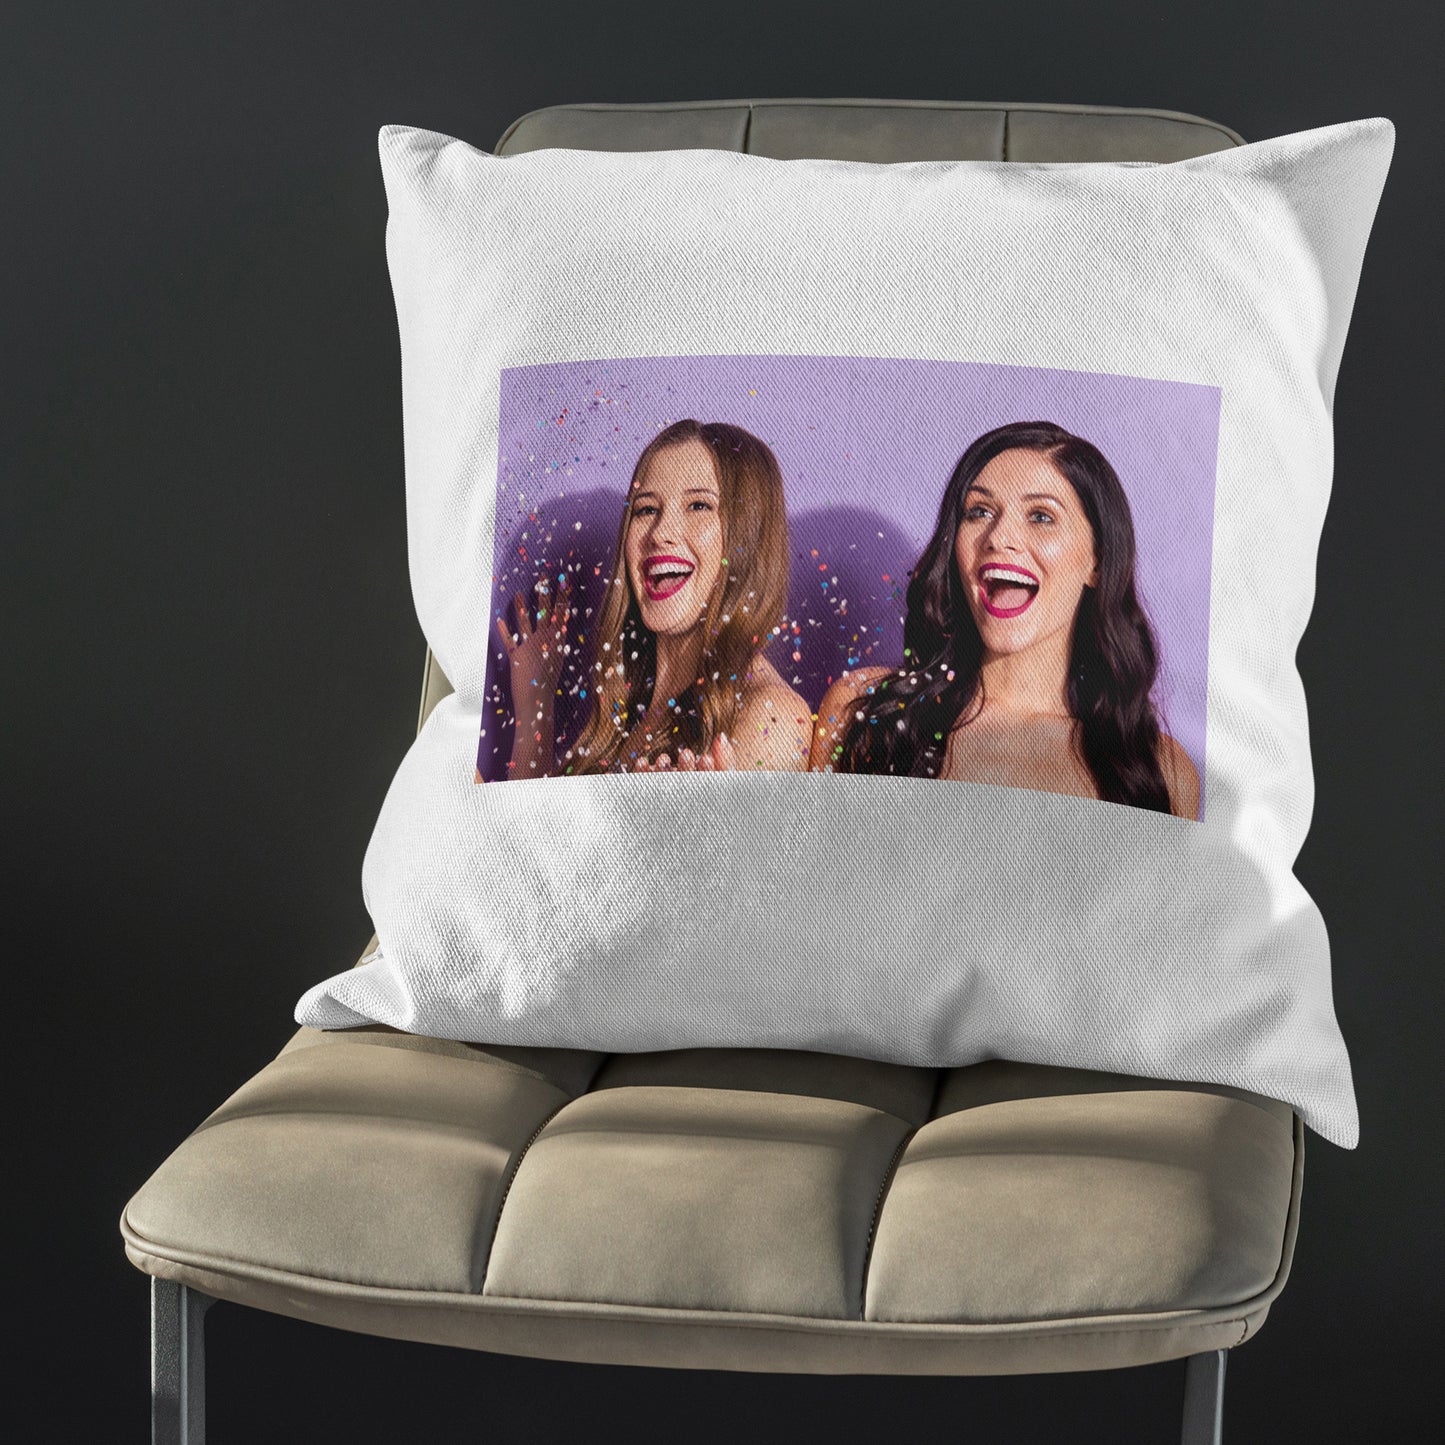 Personalised Cushion Cover Throw Pillow Cover Cushion Cover for Sofa Bed Home Decor